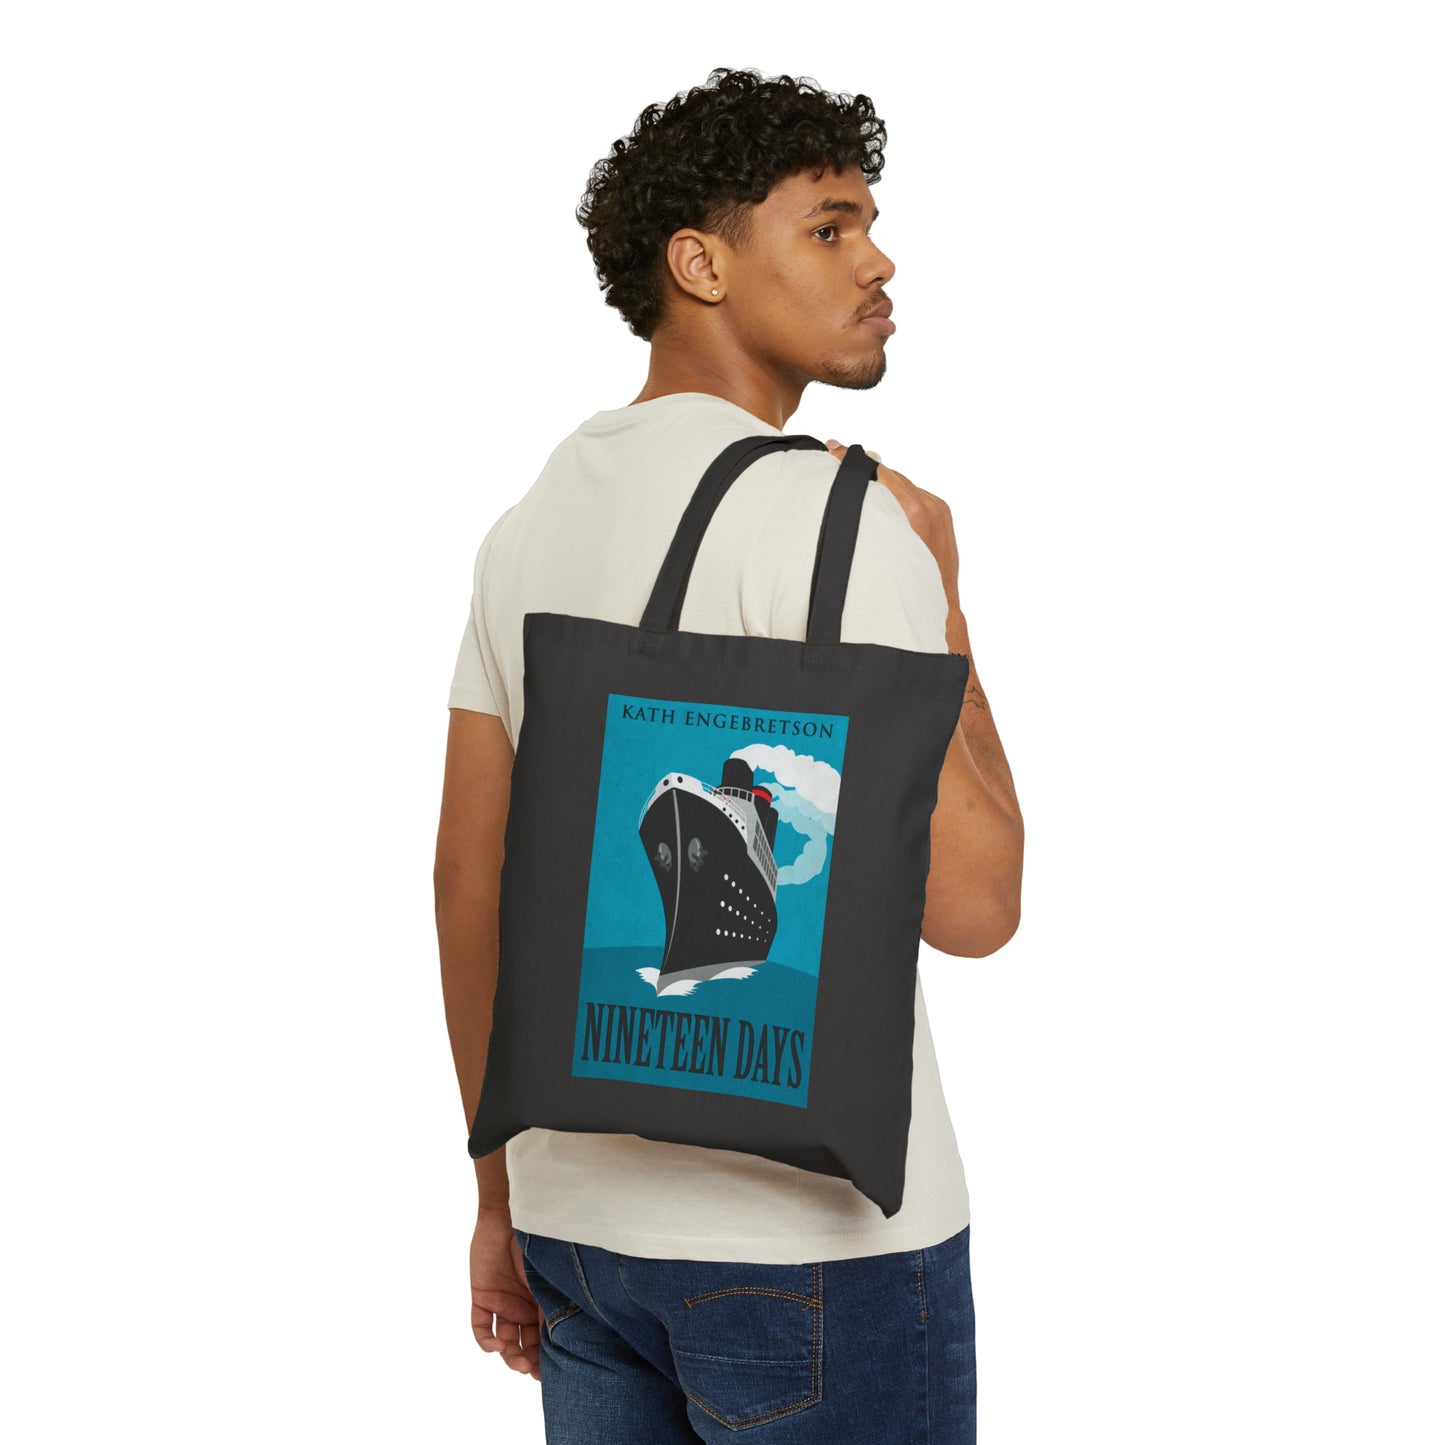 Nineteen Days - Cotton Canvas Tote Bag